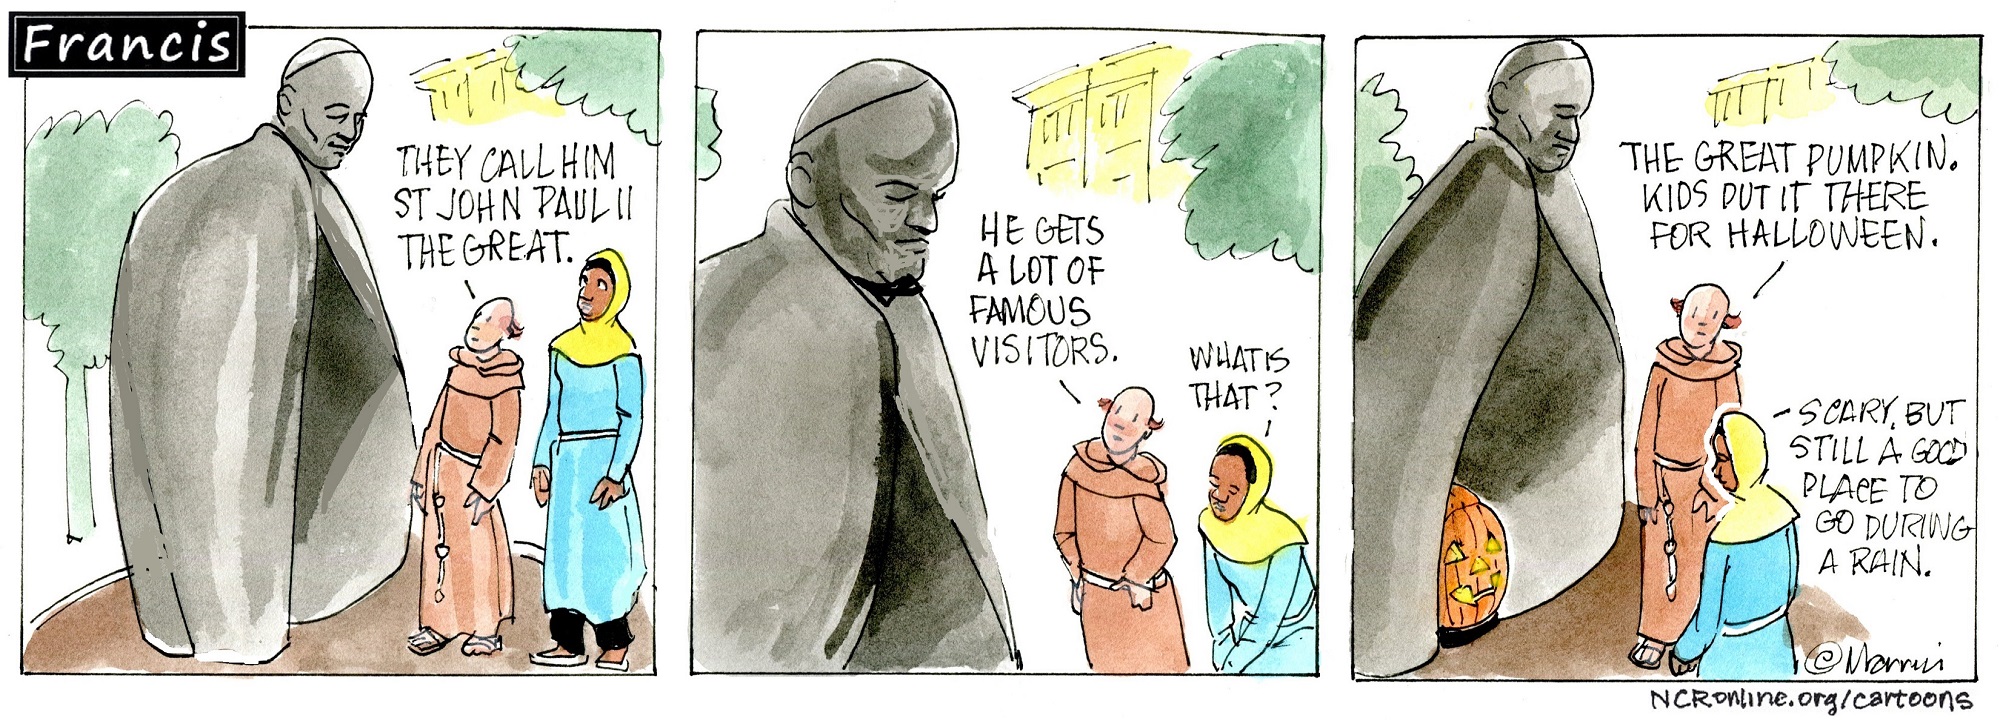 Francis, the comic strip: Brother Leo and Gabby visit the statue of St. John Paul II.